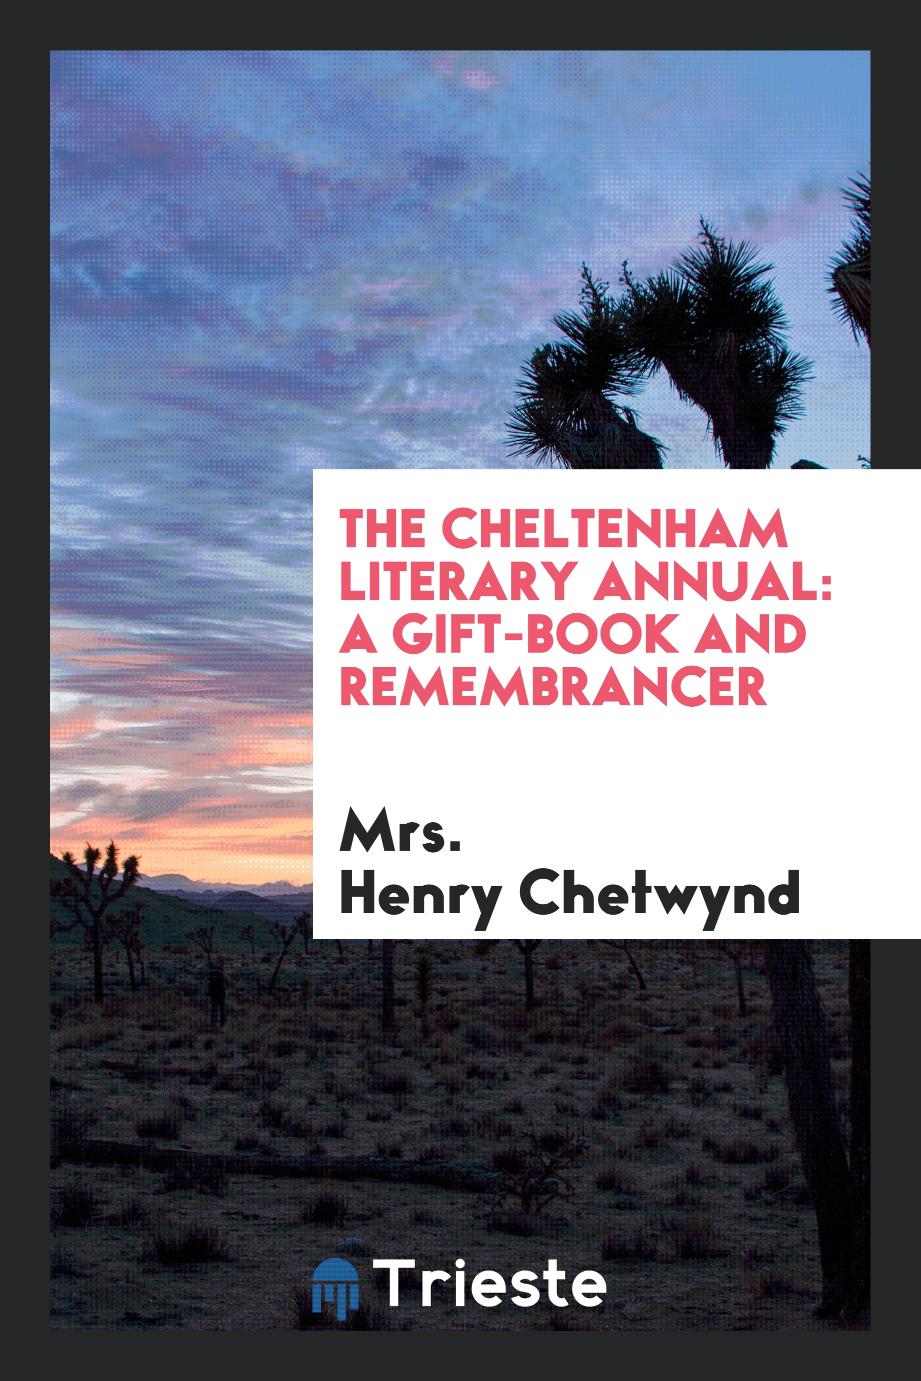 The Cheltenham Literary Annual: A Gift-Book and Remembrancer